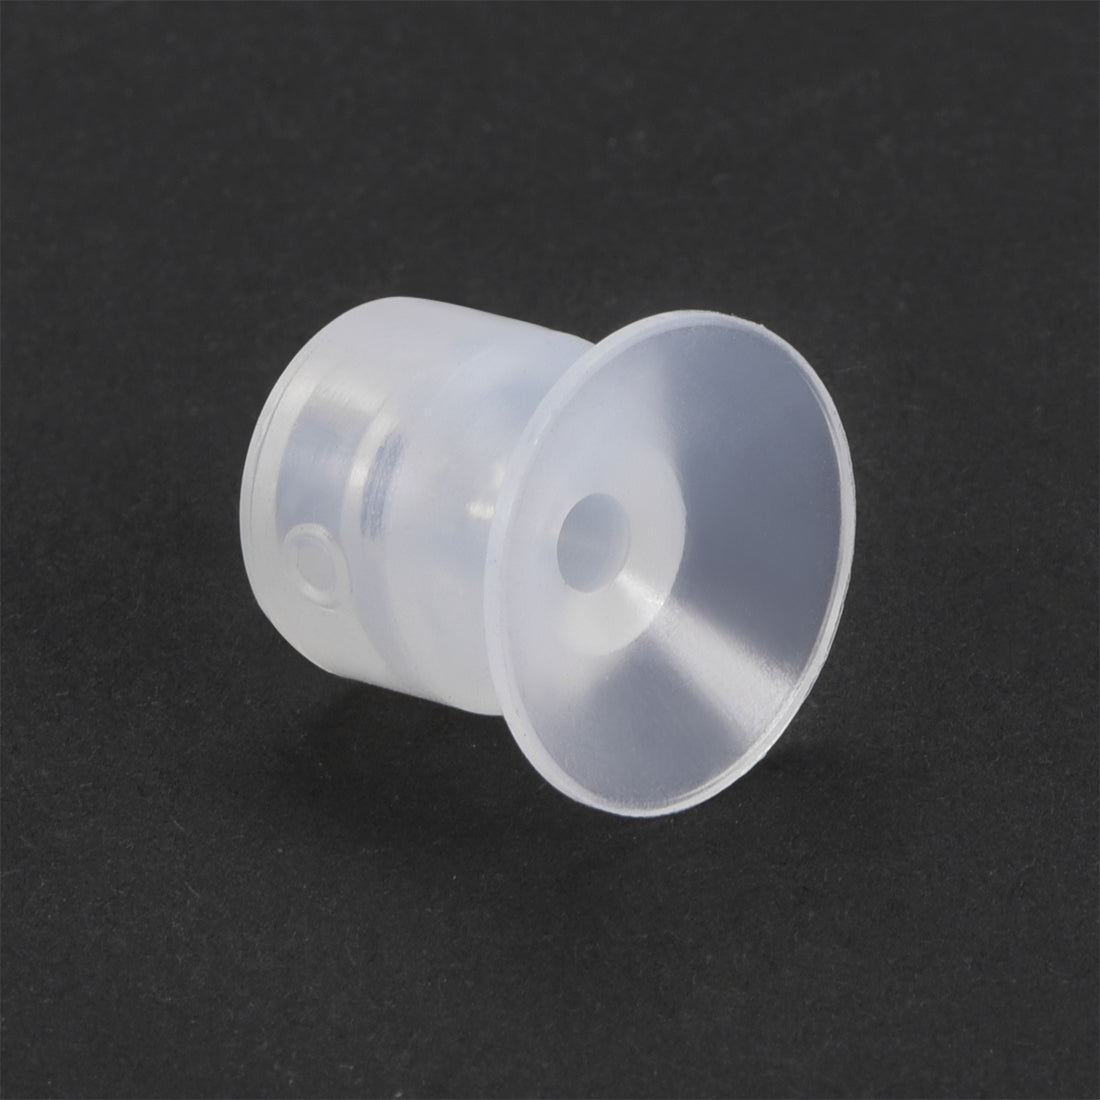 uxcell Uxcell Clear White Soft Silicone Waterproof  Miniature Vacuum Suction Cup 20mmx5mm Bellows Suction Cup,4pcs